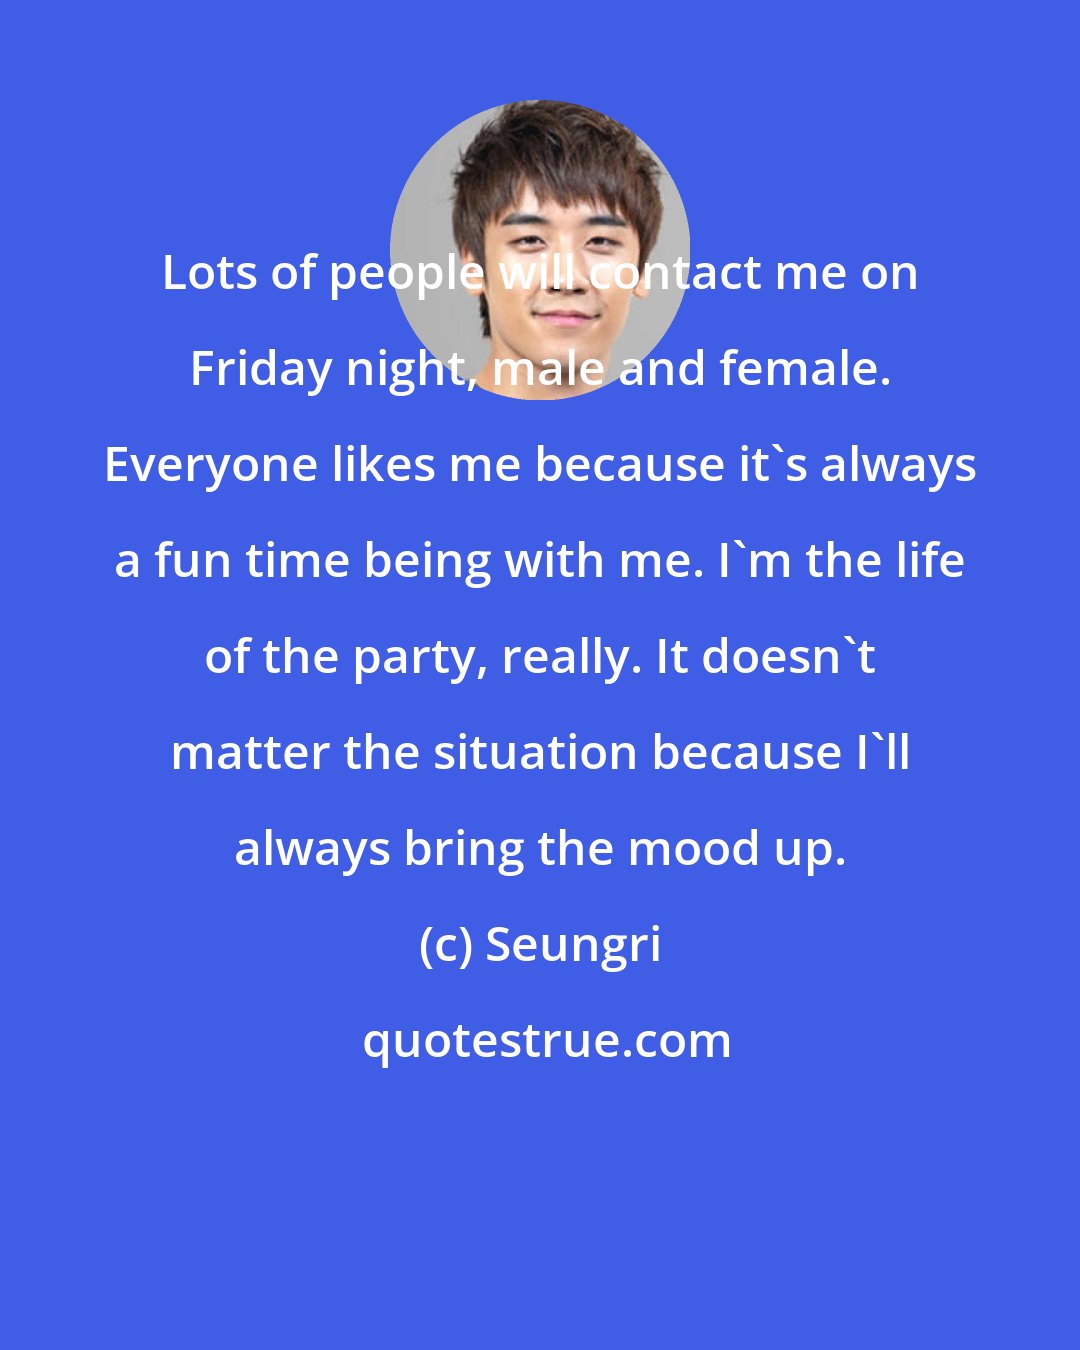 Seungri: Lots of people will contact me on Friday night, male and female. Everyone likes me because it's always a fun time being with me. I'm the life of the party, really. It doesn't matter the situation because I'll always bring the mood up.